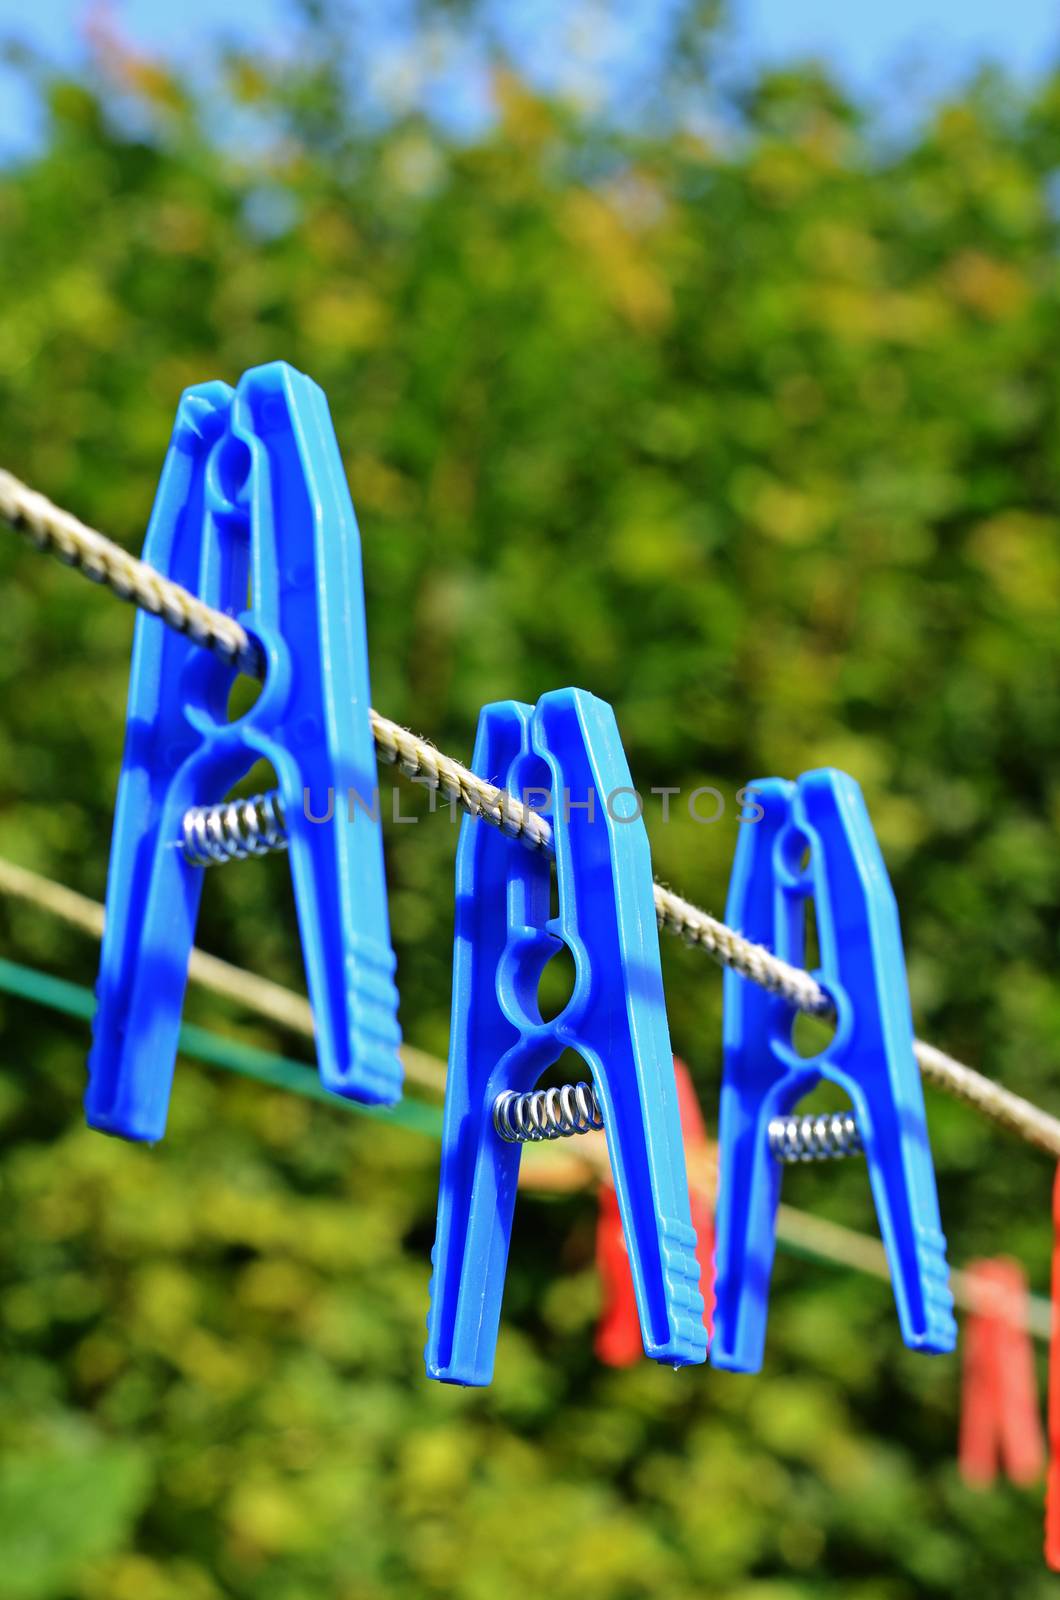 clothes pegs, laundry pins by sarkao